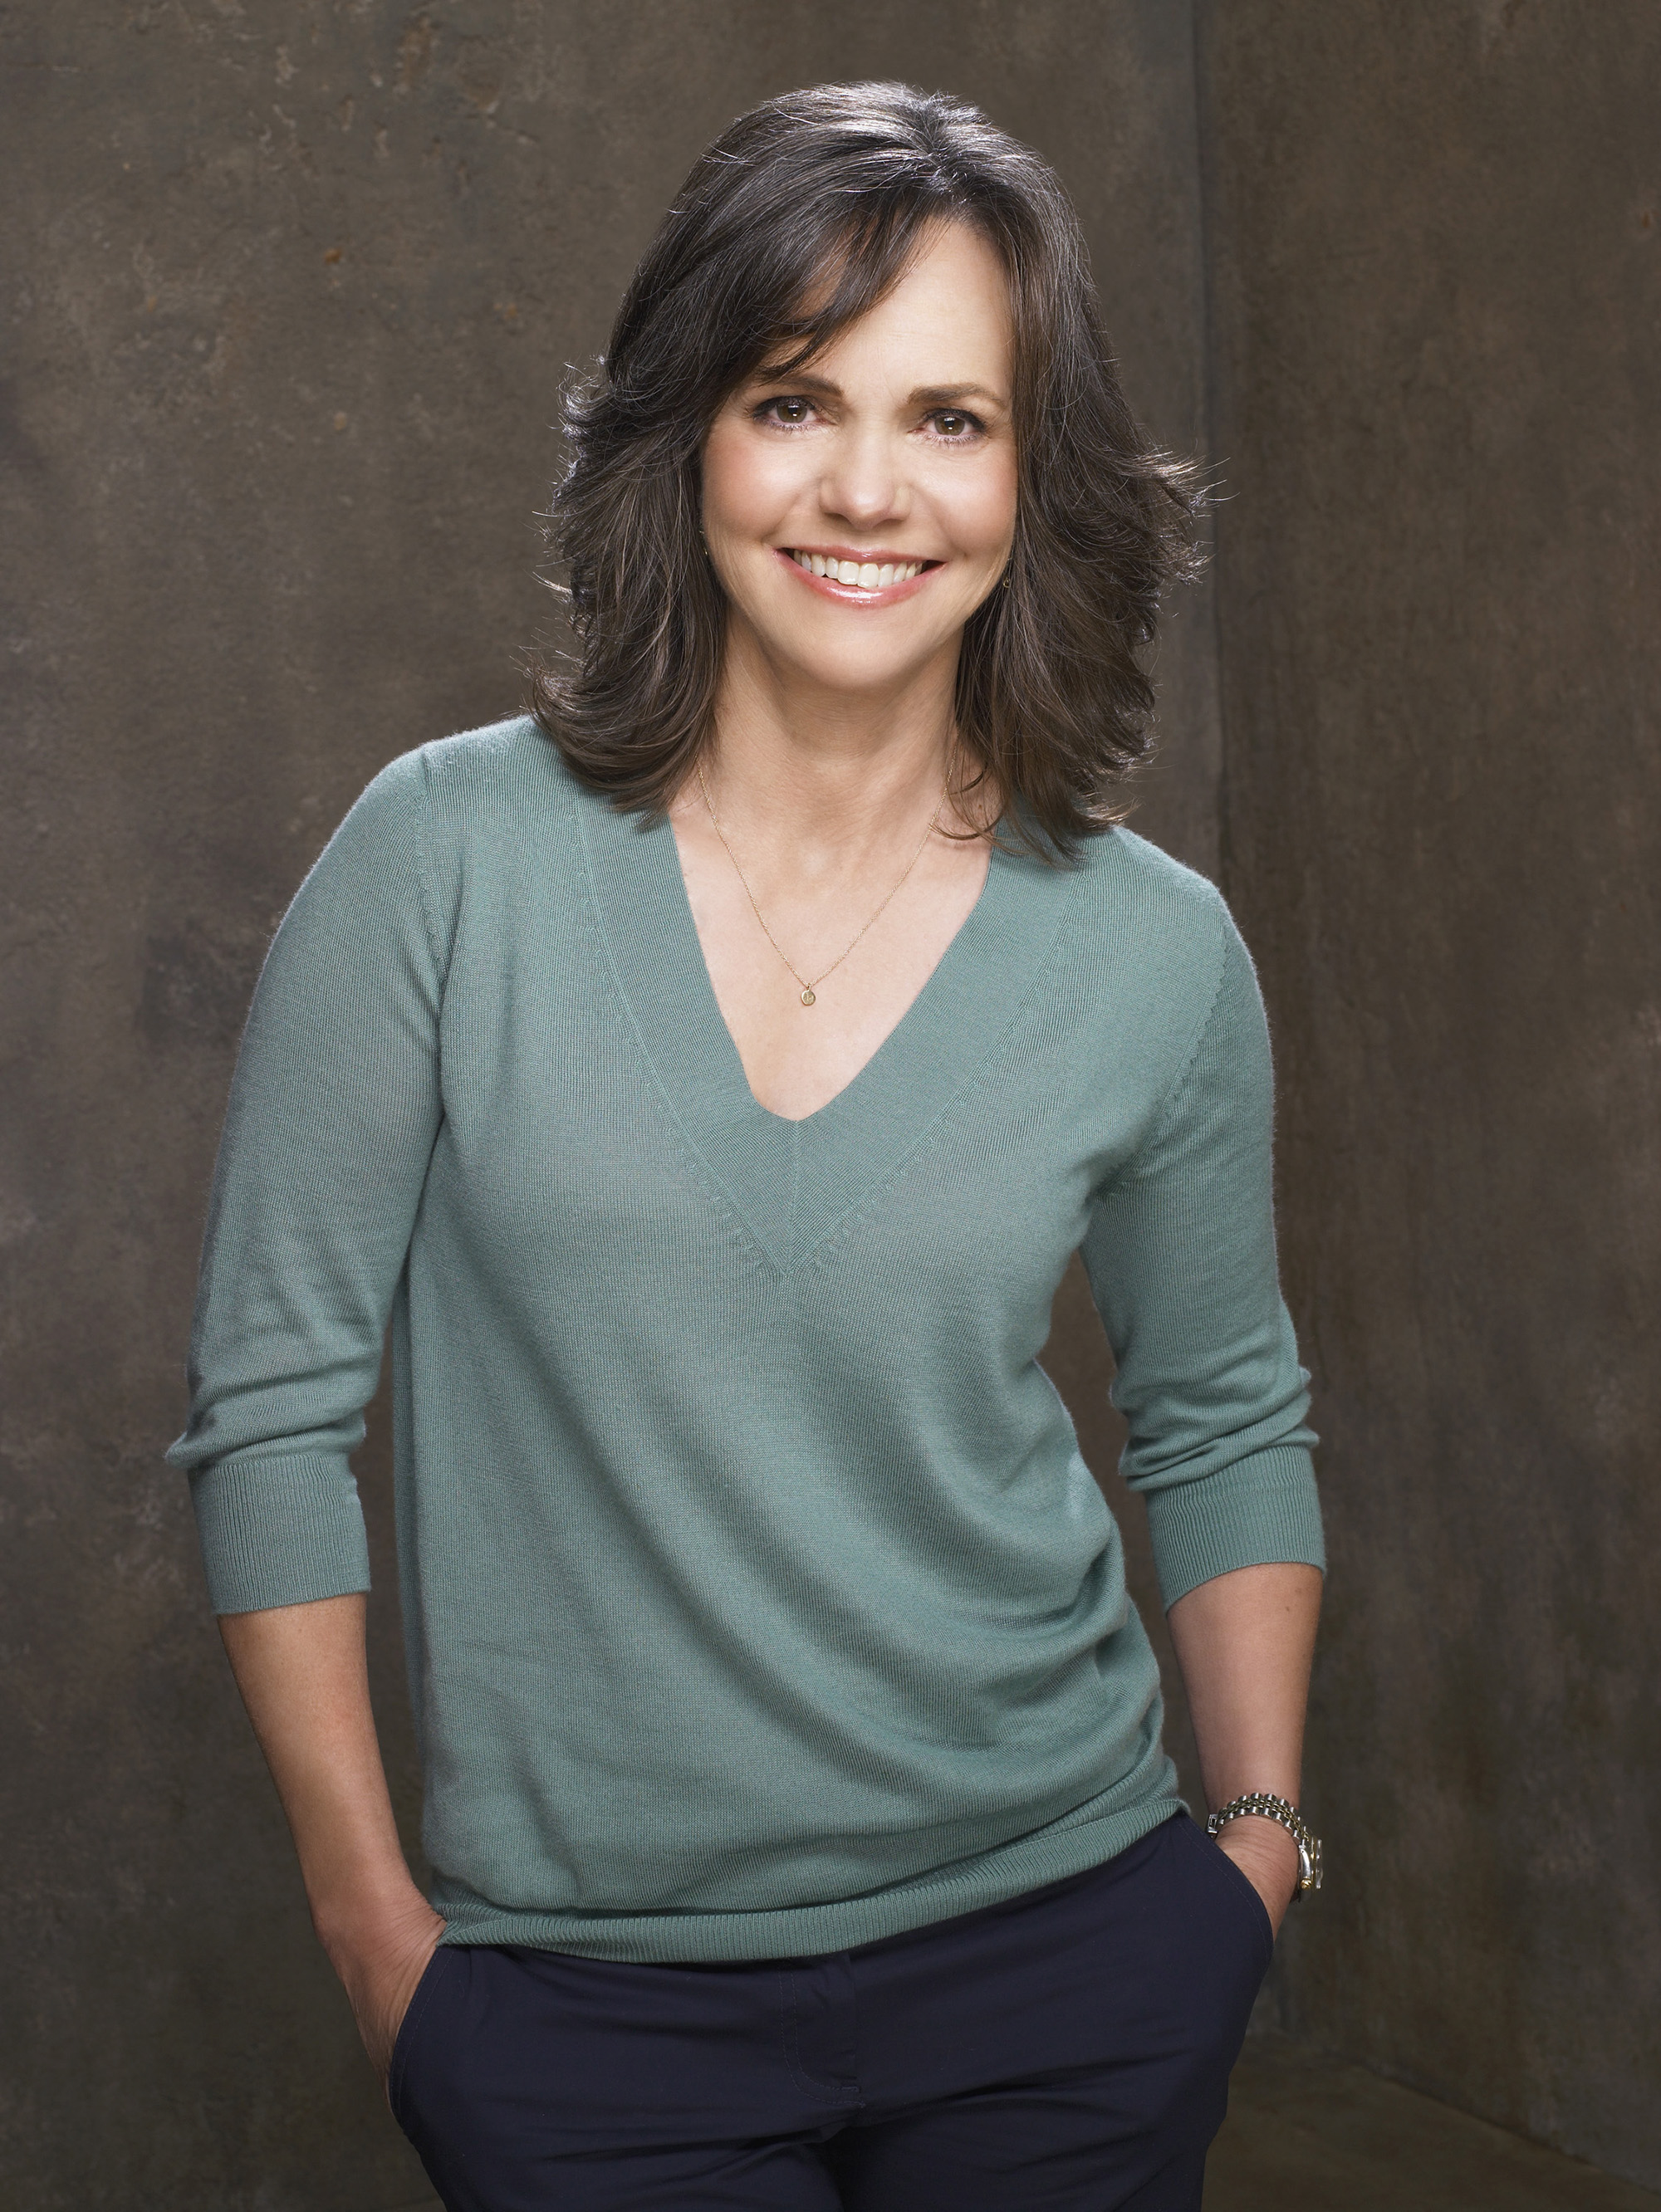 photo, photograph, gallery, photo. photo of Sally for fans of Sally Field. ...